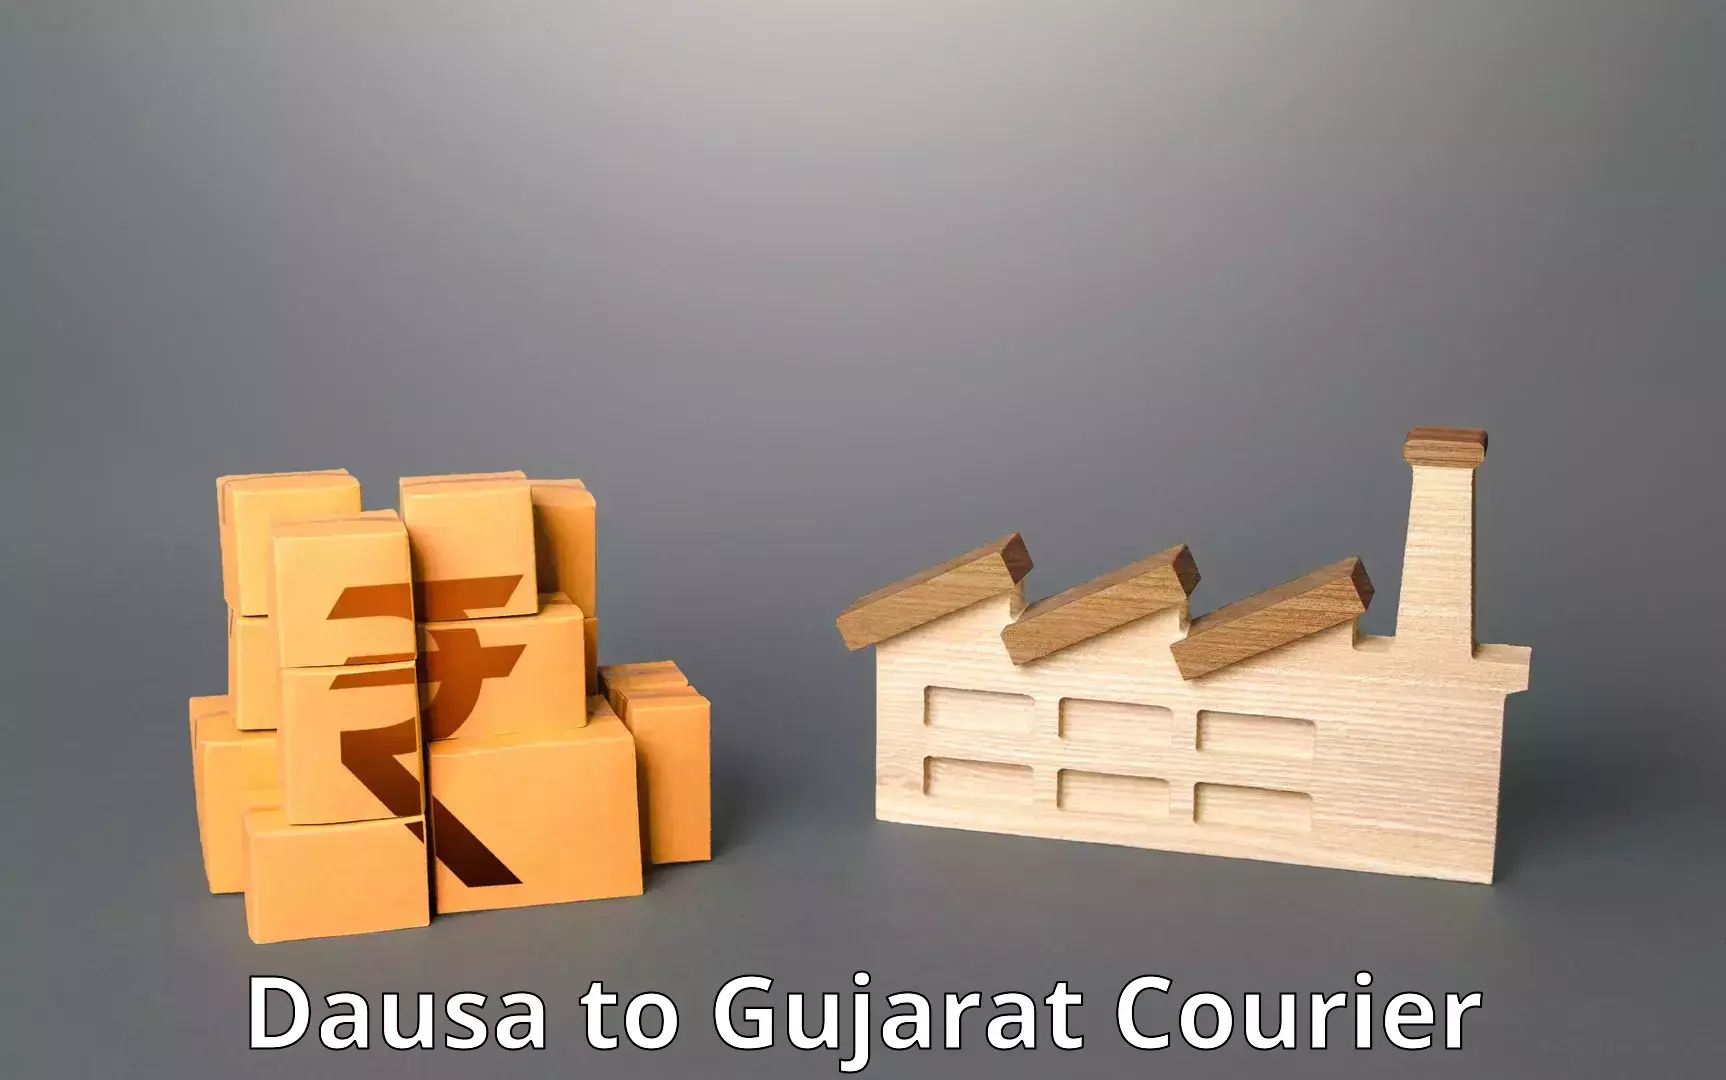 Next-day freight services Dausa to Surat